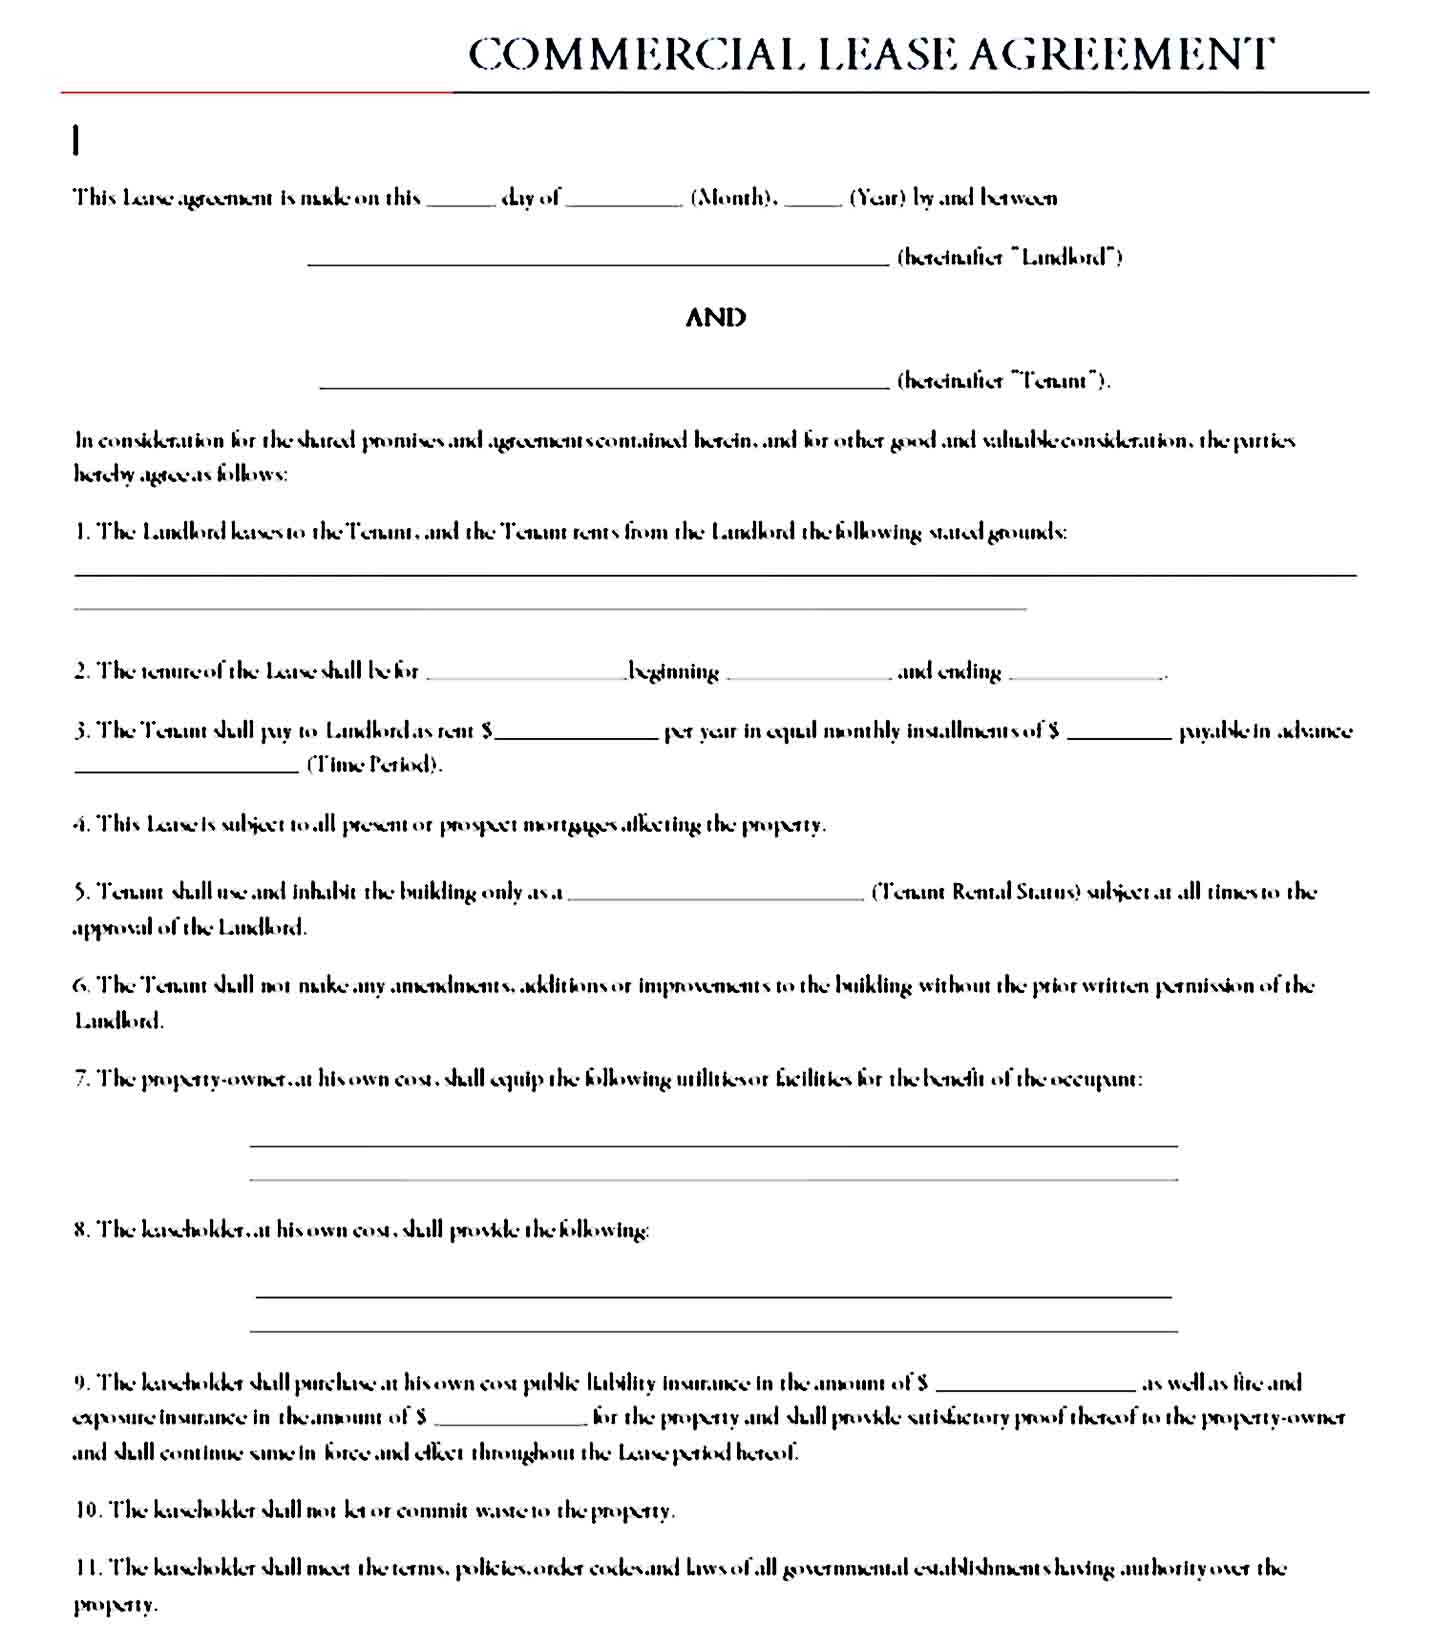 Commercial Lease Agreement Template 05